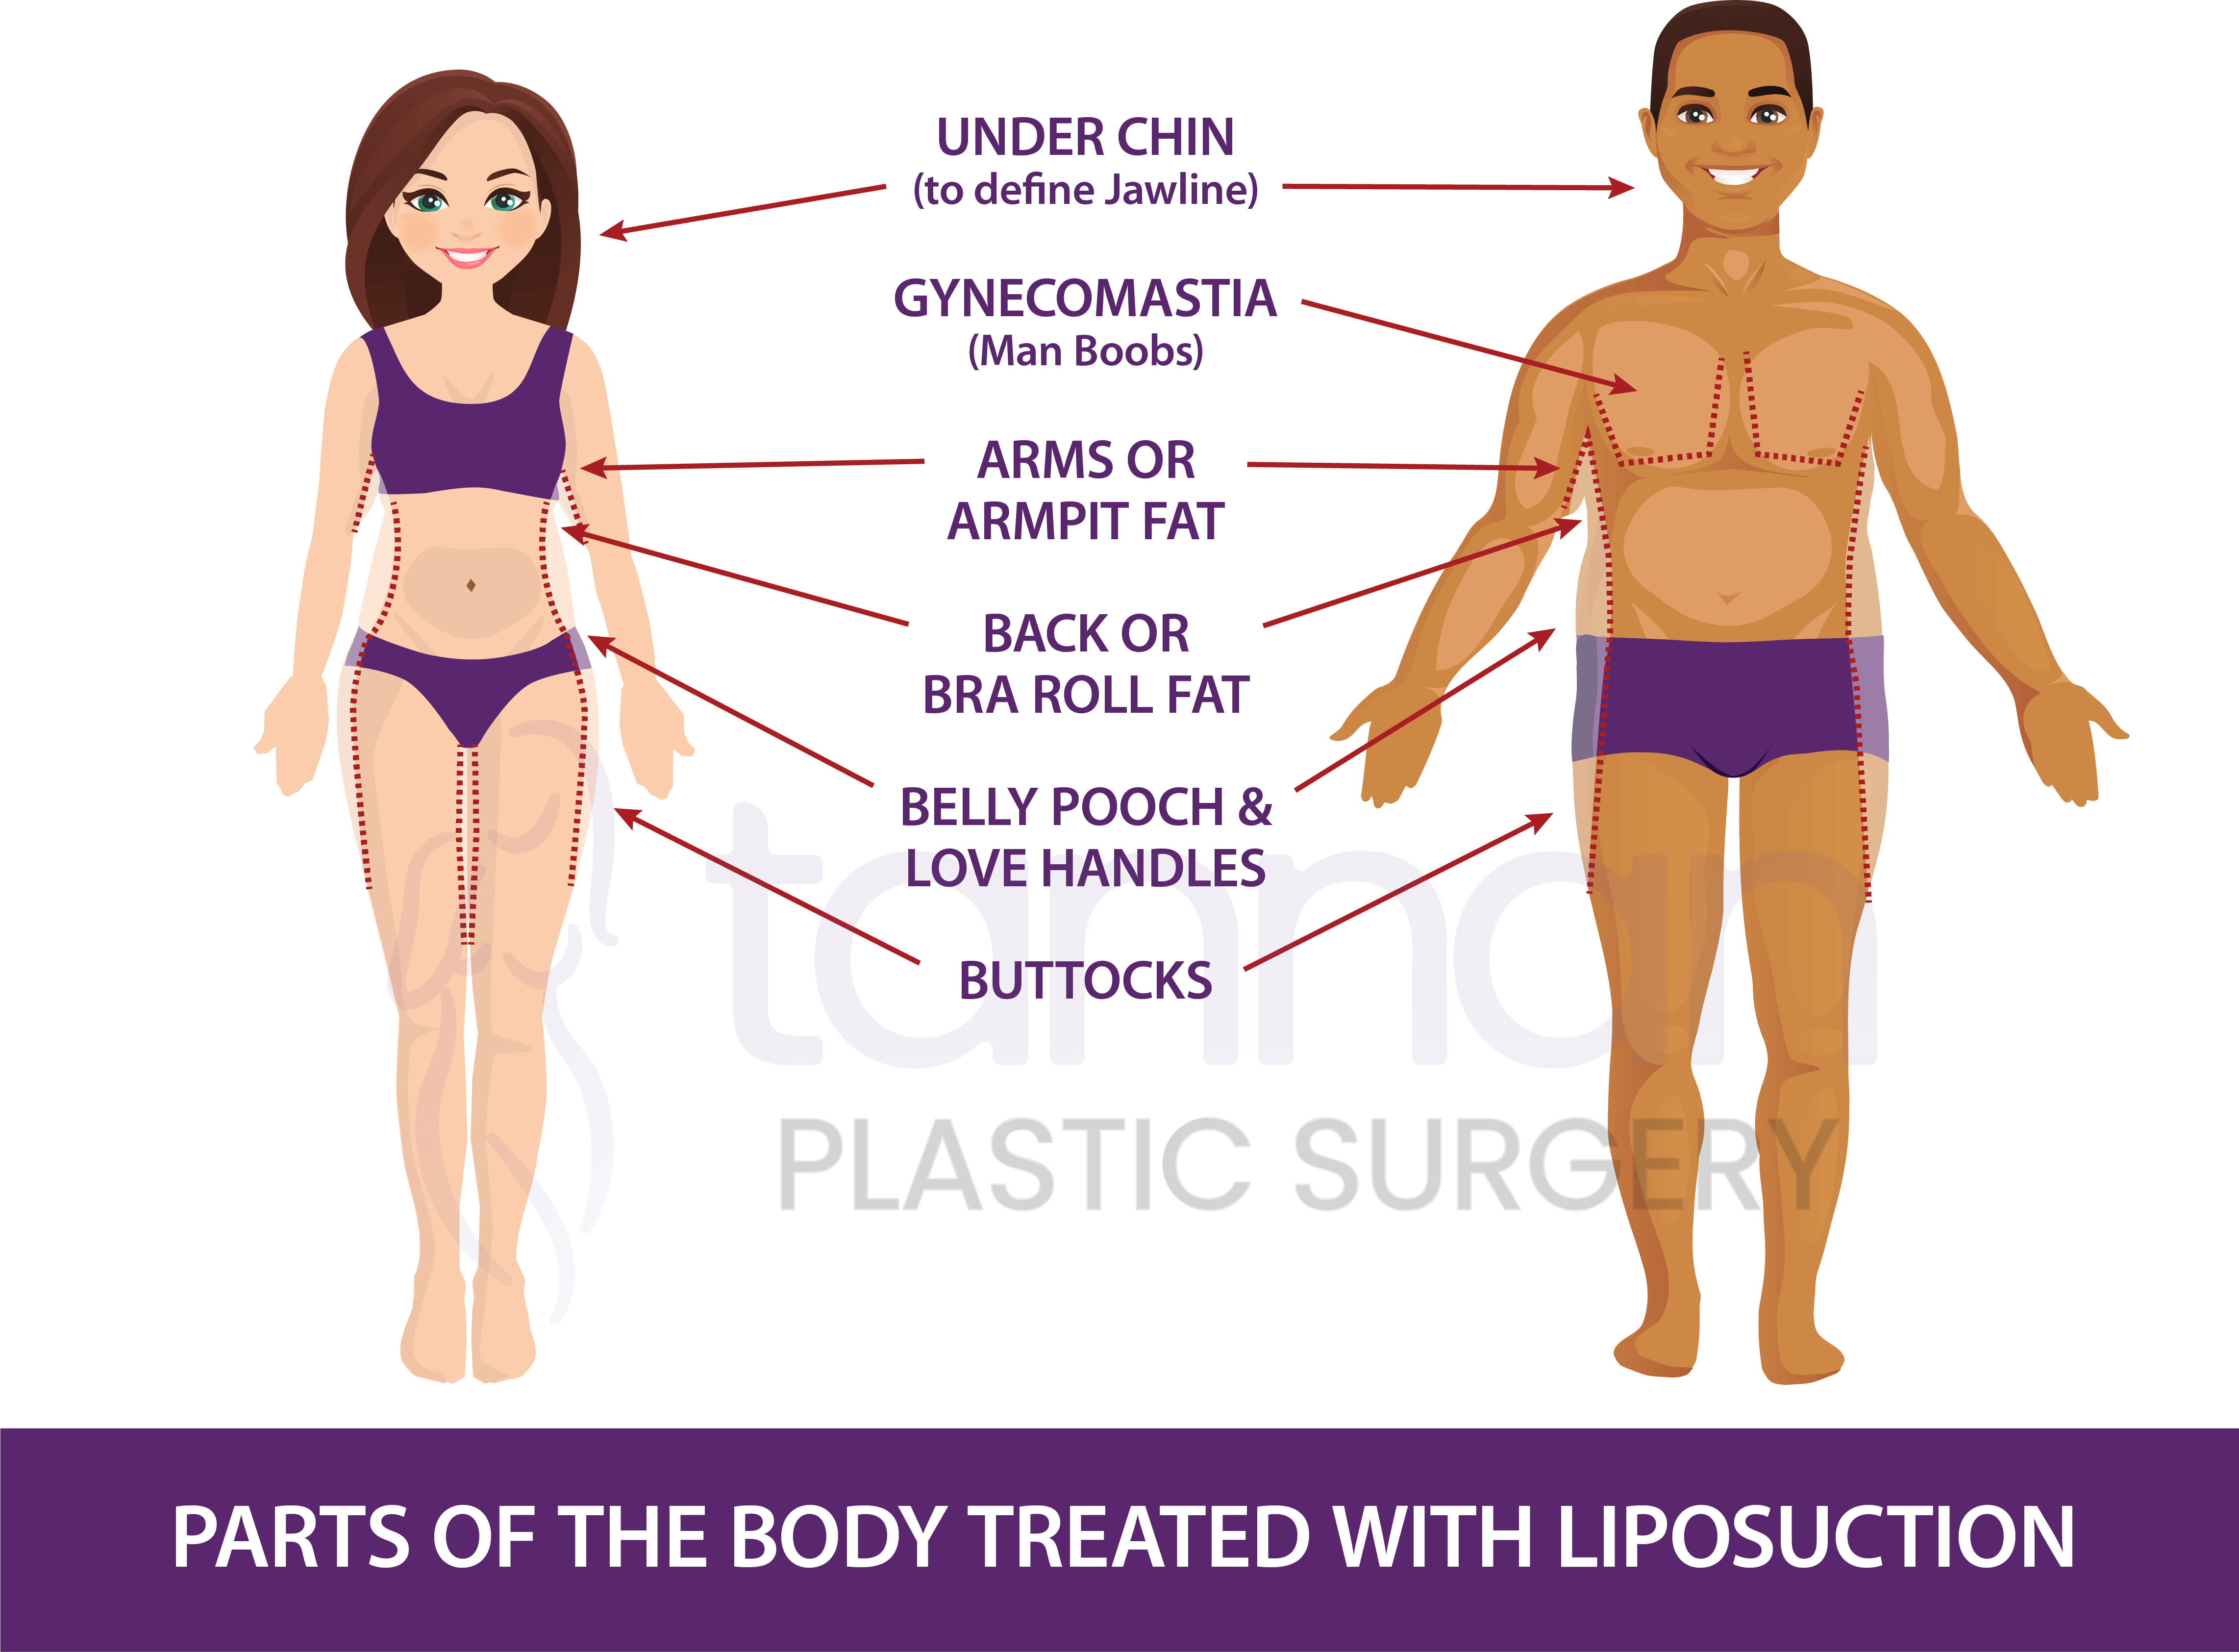 Which parts of the body can be treated with Liposuction